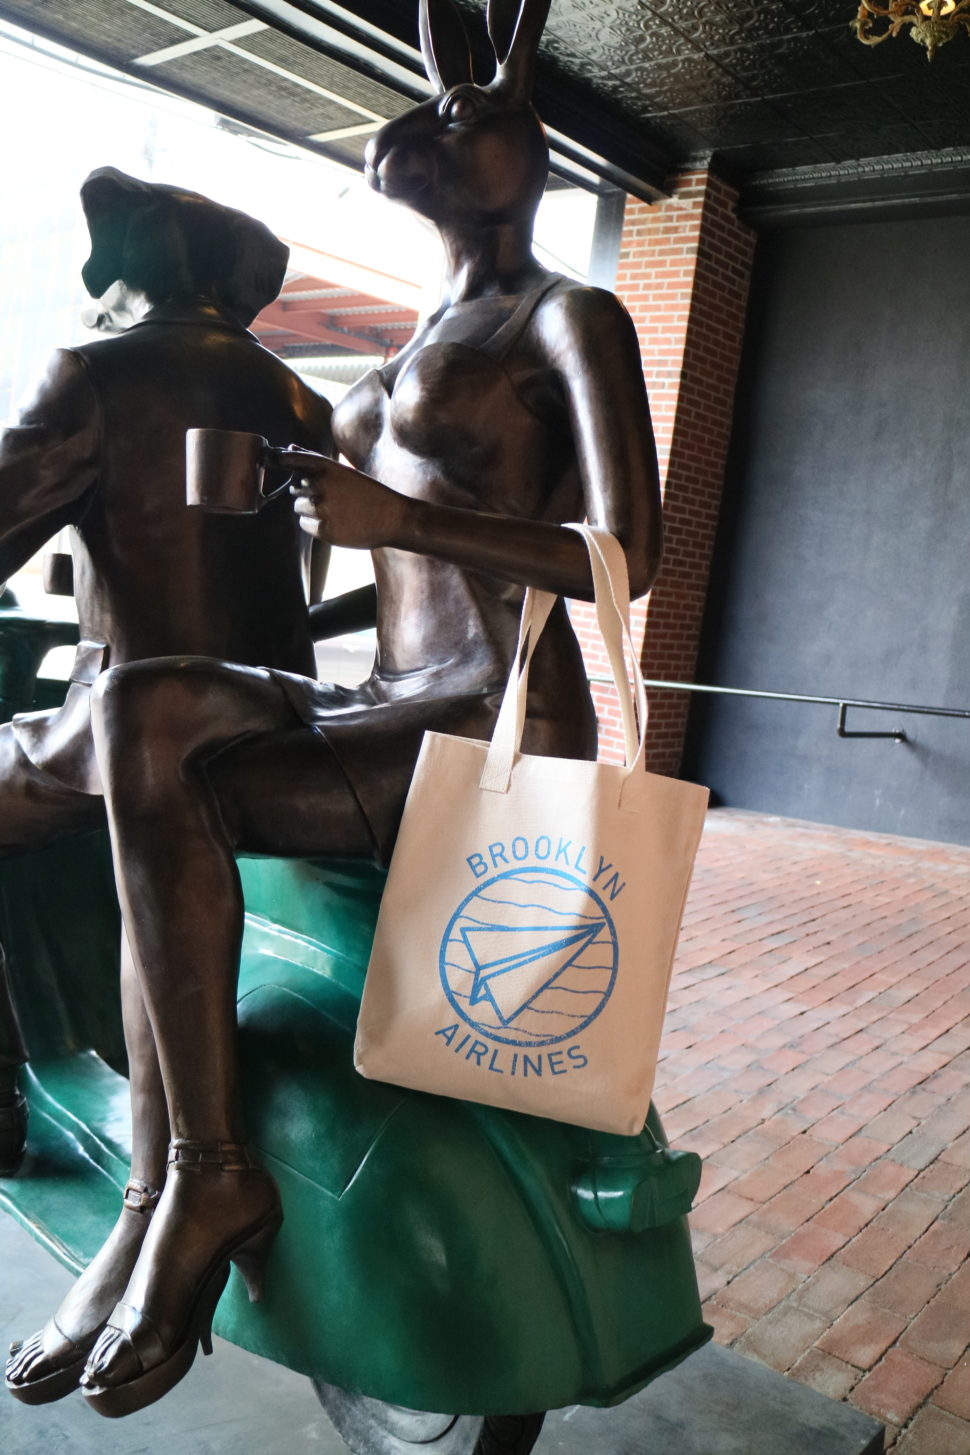 Henry Norman Hotel Outdoor Sculpture Details featuring Brooklyn Airliners Totes.